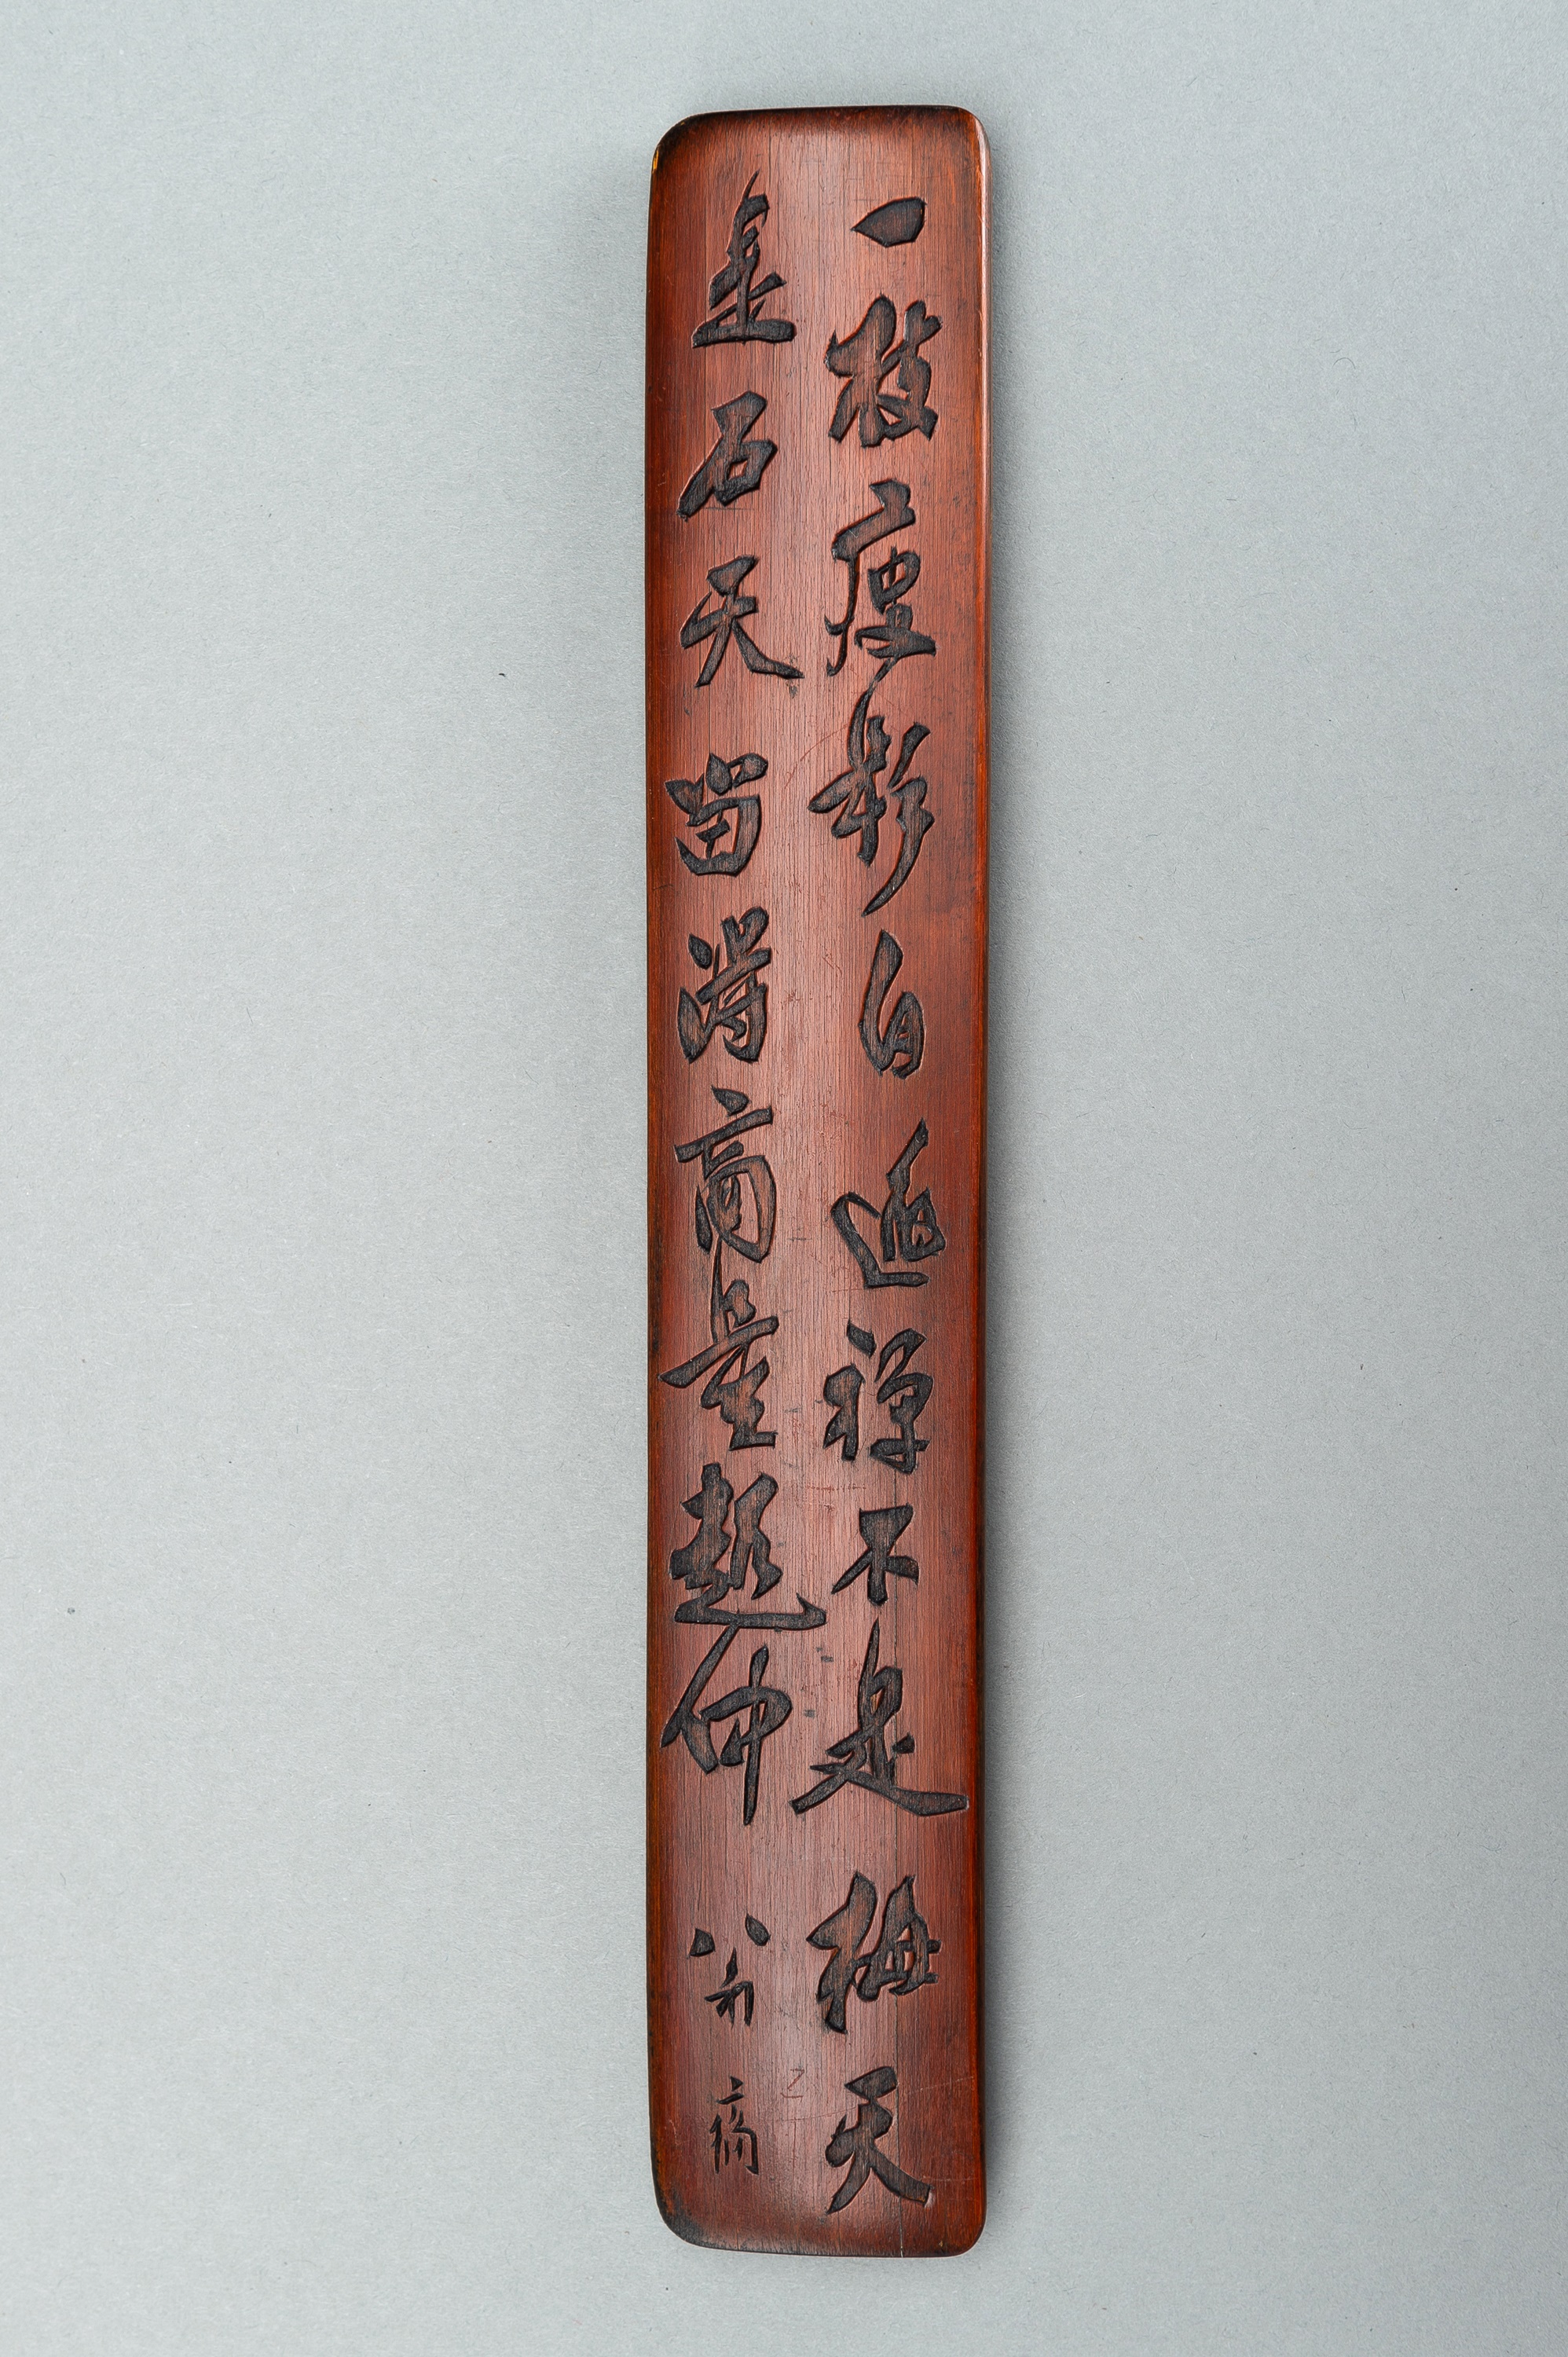 A BAMBOO WRIST REST WITH CALIGRAPHY